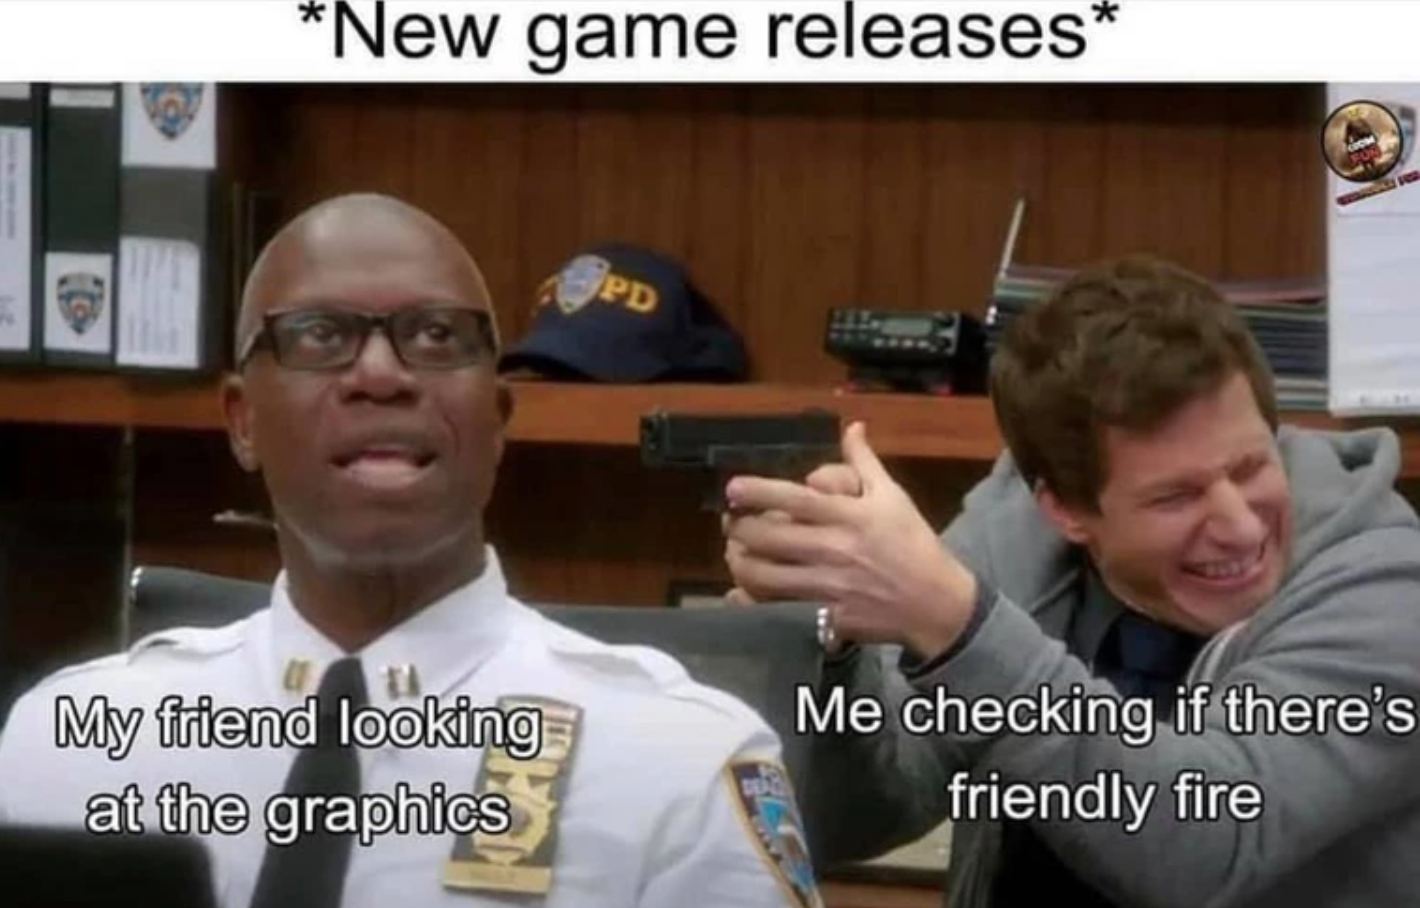 gaming memes and pics - Video game - New game releases My friend looking at the graphics Me checking if there's friendly fire